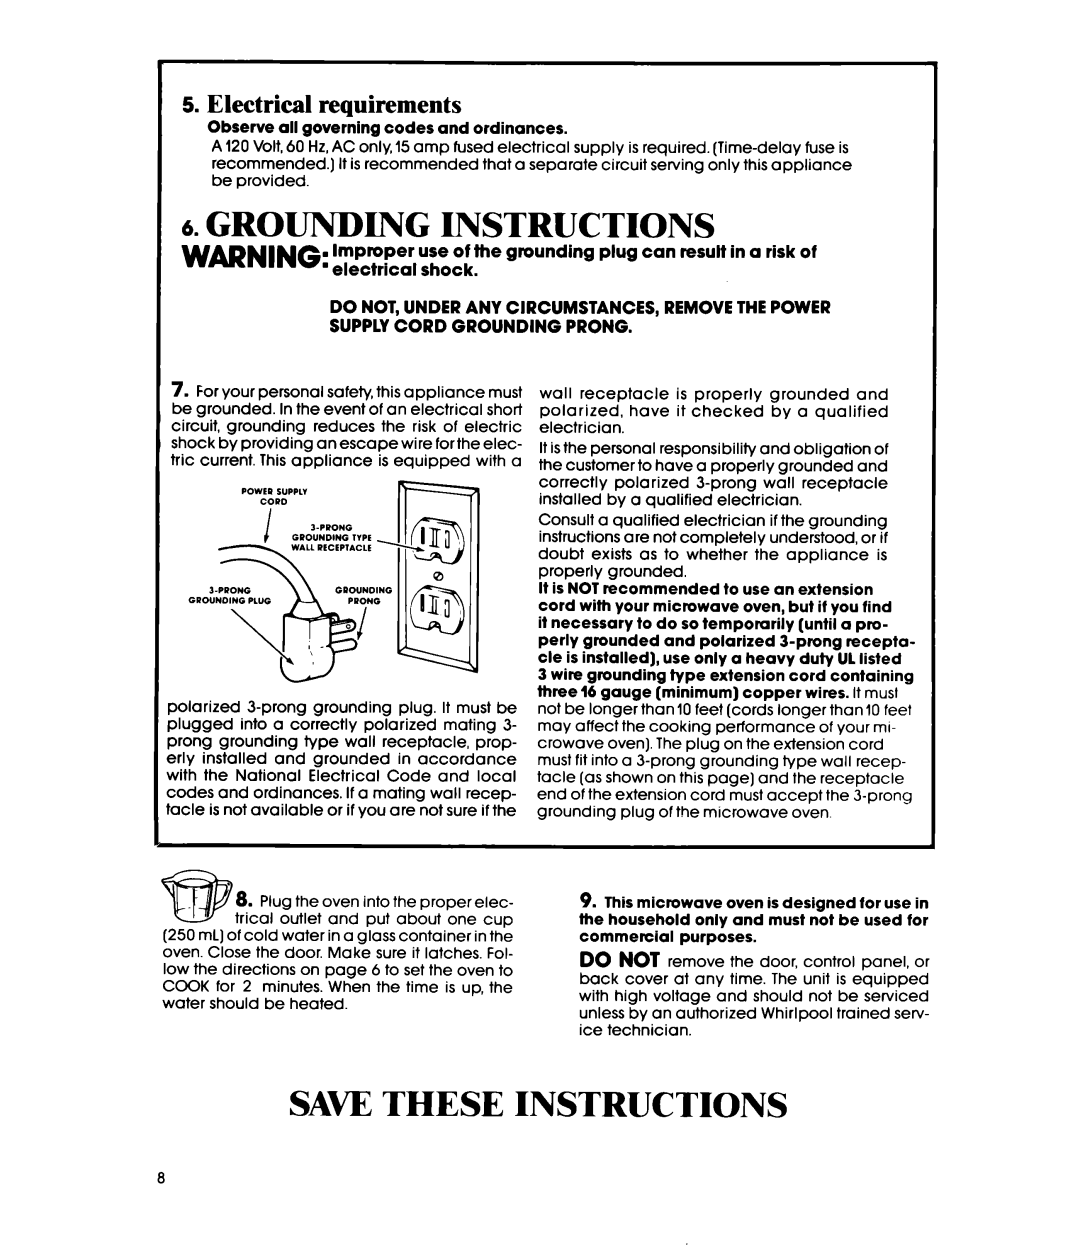 Whirlpool MW120EXP Grounding Instructions, Save These Instructions, Electrical requirements, Improper, ’ electrical, shock 